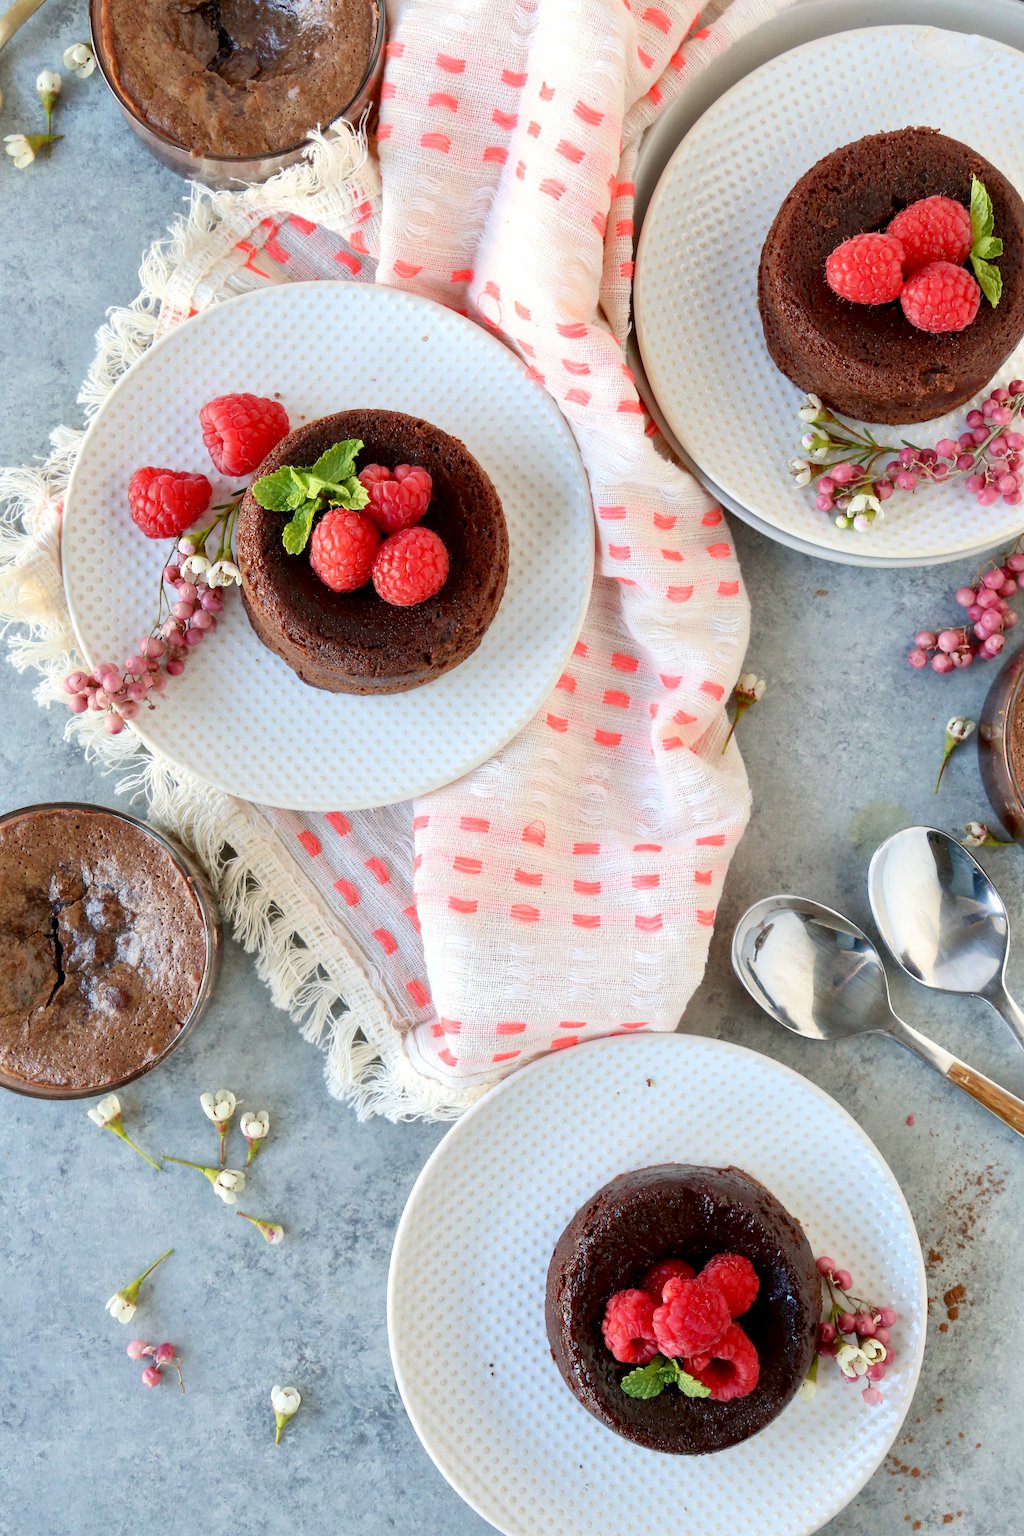 a table filled with chocolate cakes on dessert plates, garnished with raspberries